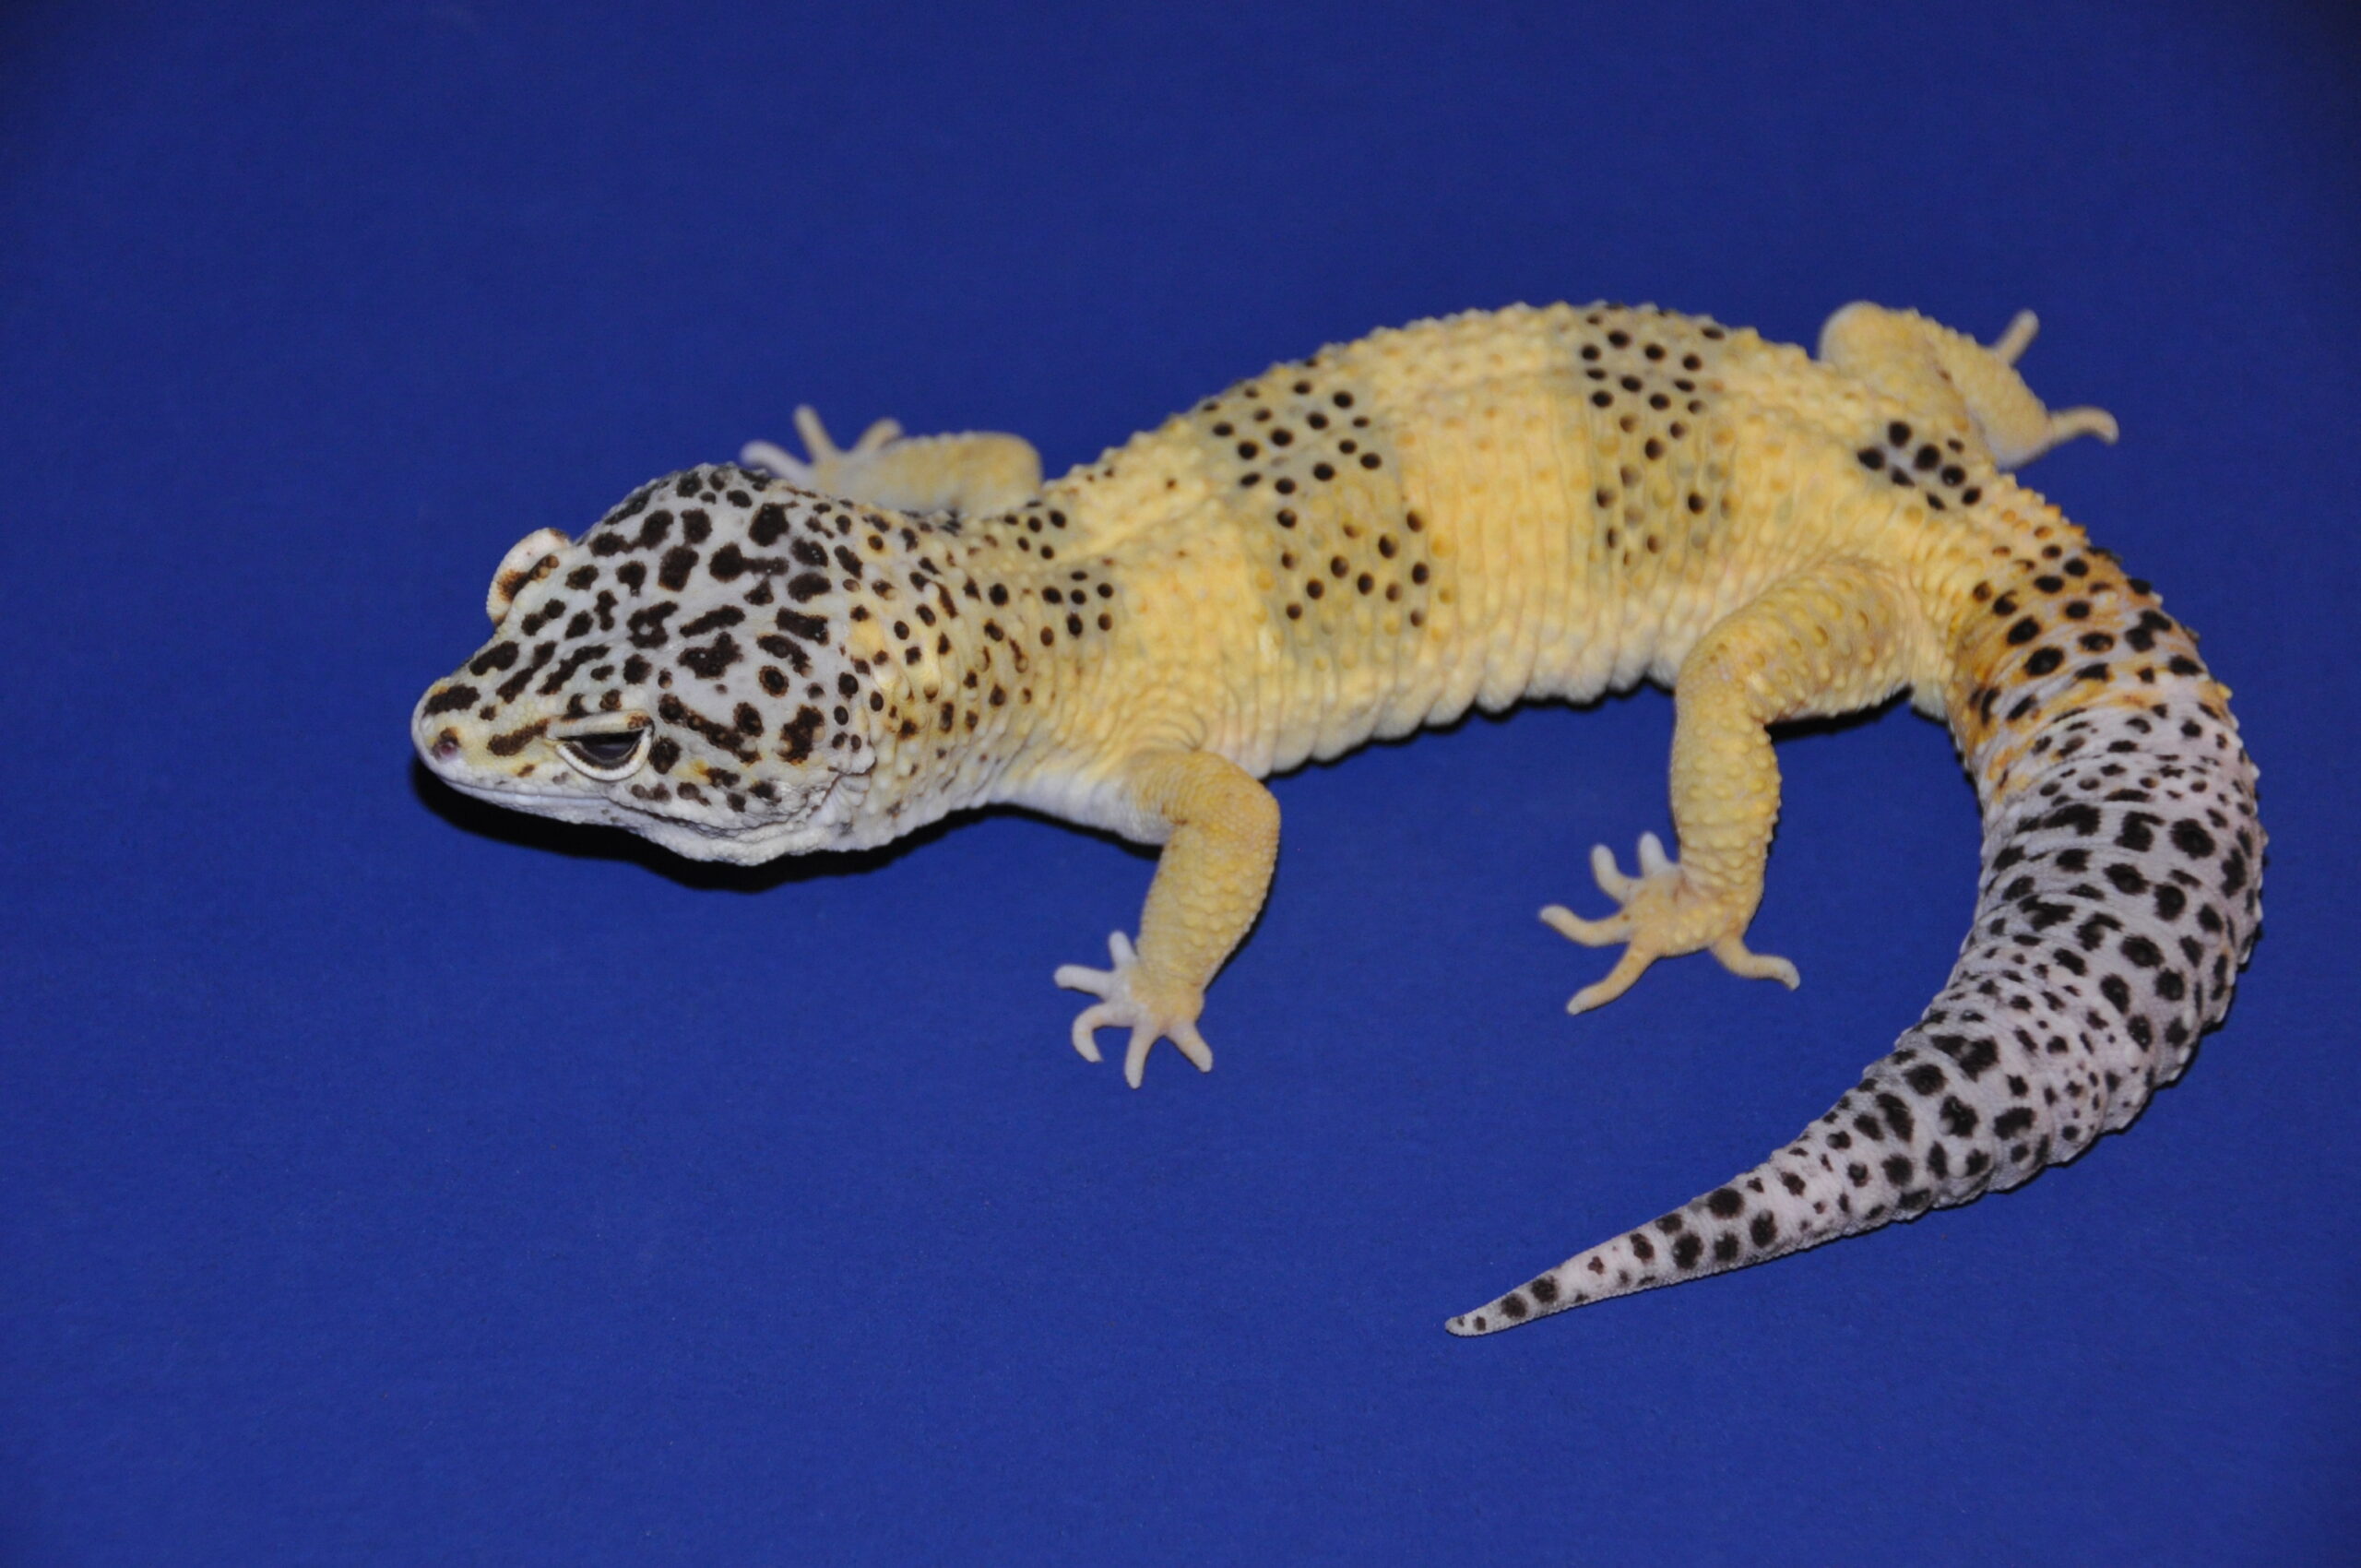 These popular pet lizards may hold the key to studying skin cancer